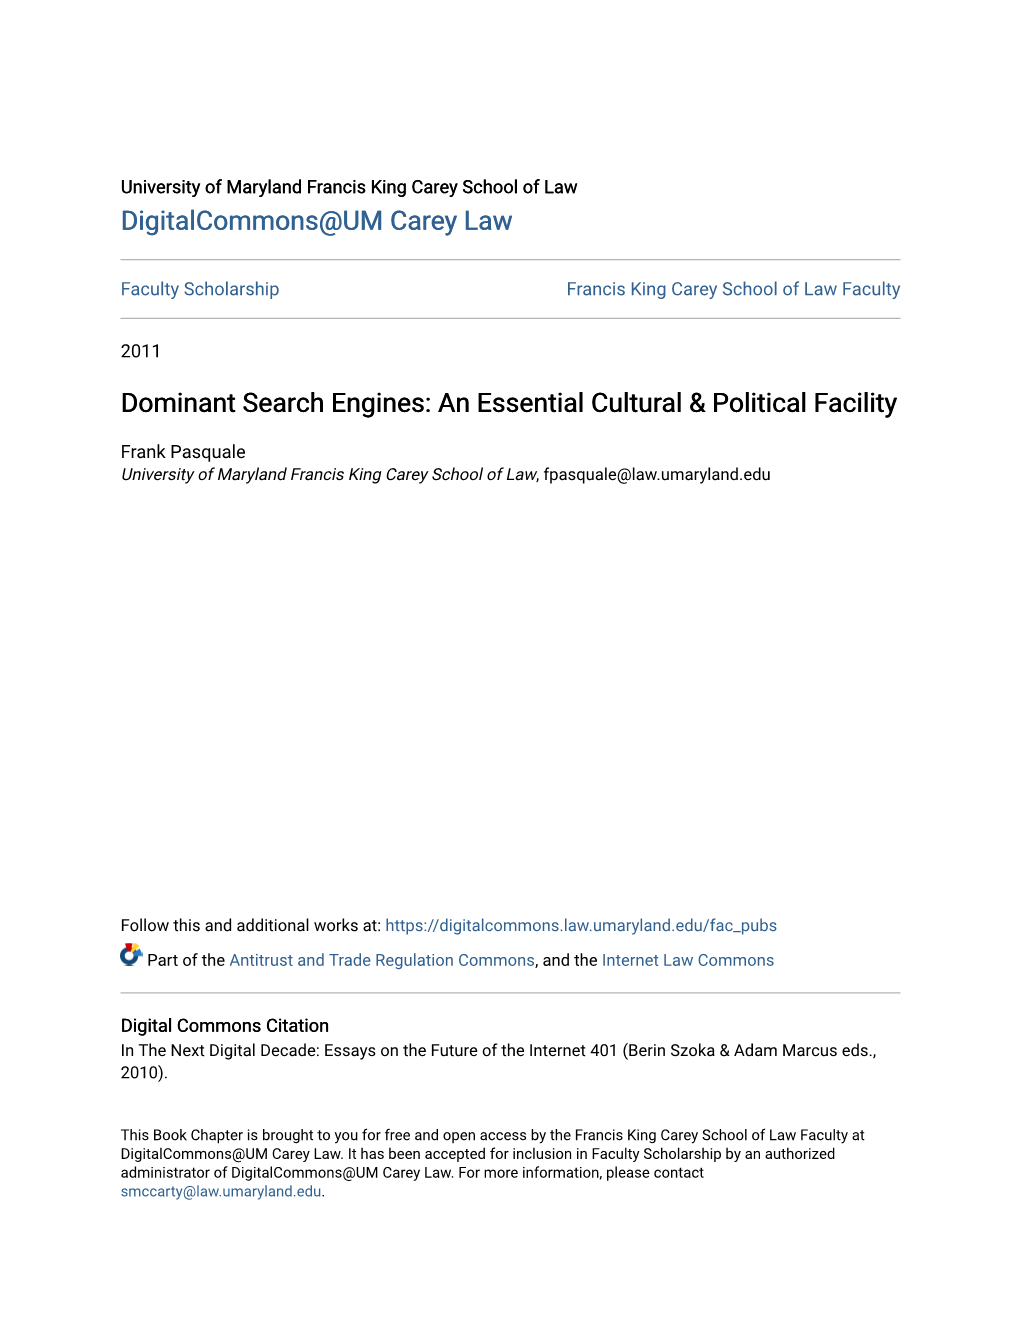 Dominant Search Engines: an Essential Cultural & Political Facility